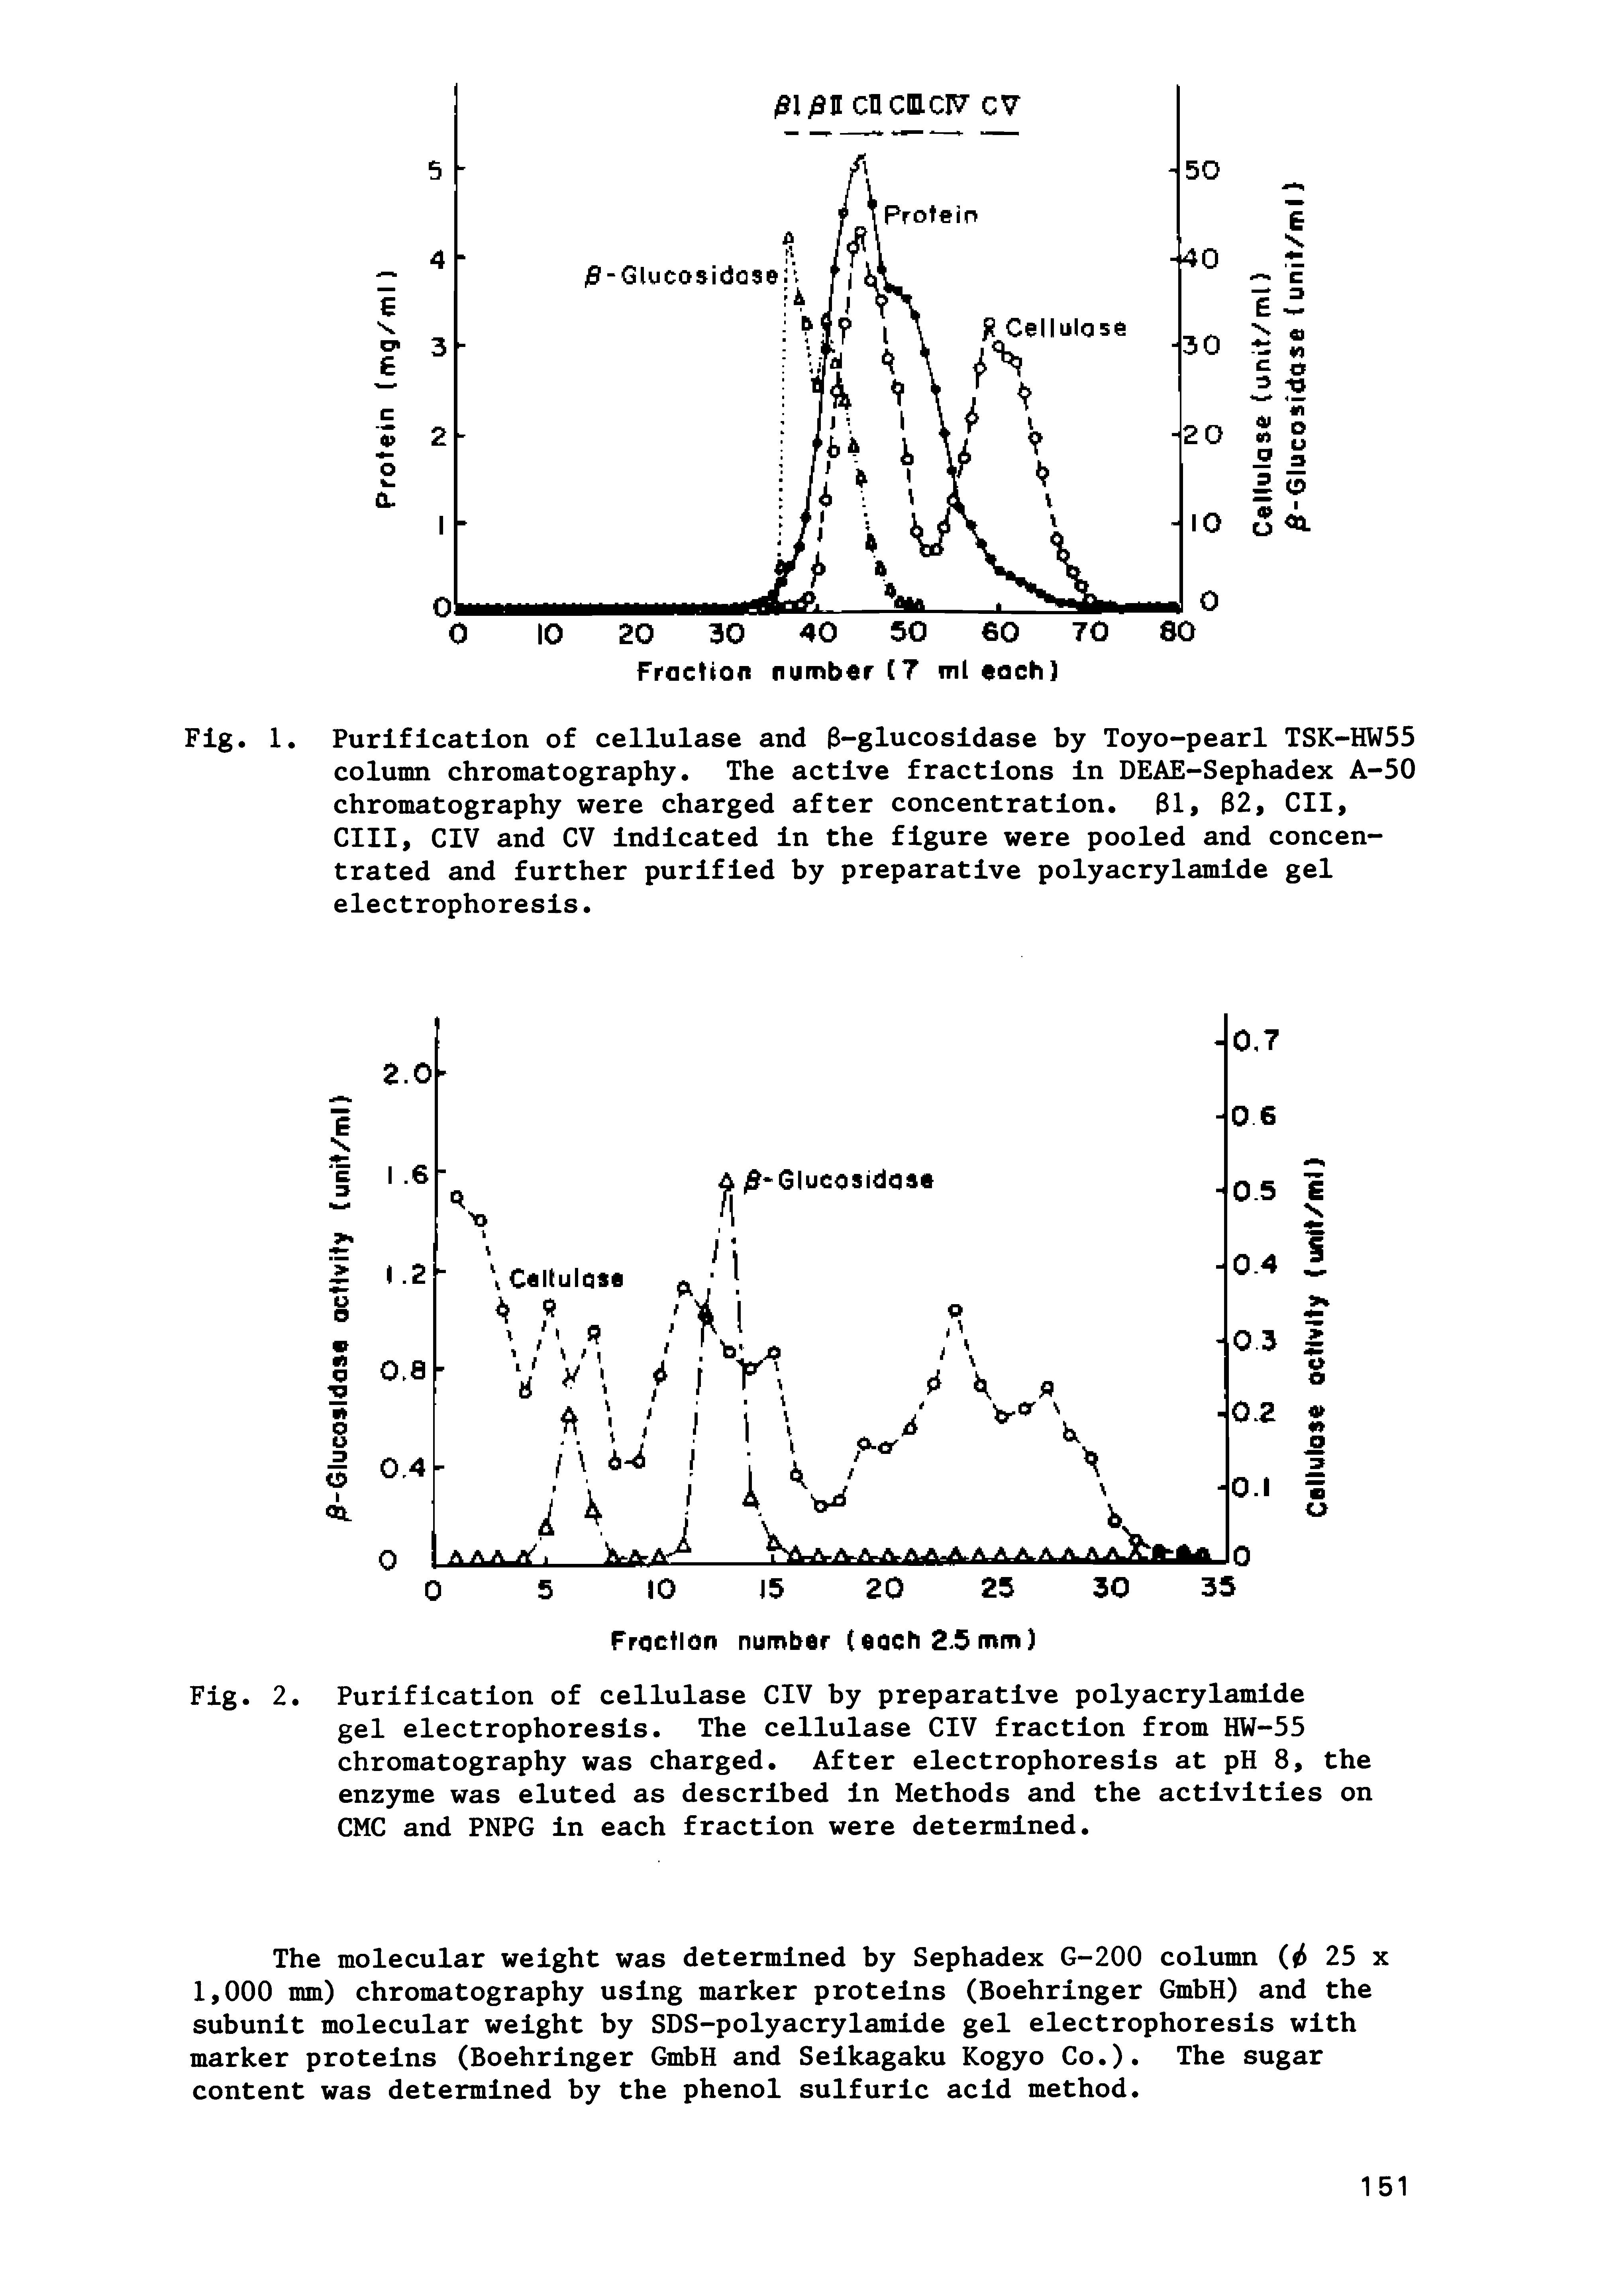 Fig. 2. Purification of cellulase CIV by preparative polyacrylamide gel electrophoresis. The cellulase CIV fraction from HW-55 chromatography was charged. After electrophoresis at pH 8, the enzyme was eluted as described in Methods and the activities on CMC and PNPG in each fraction were determined.